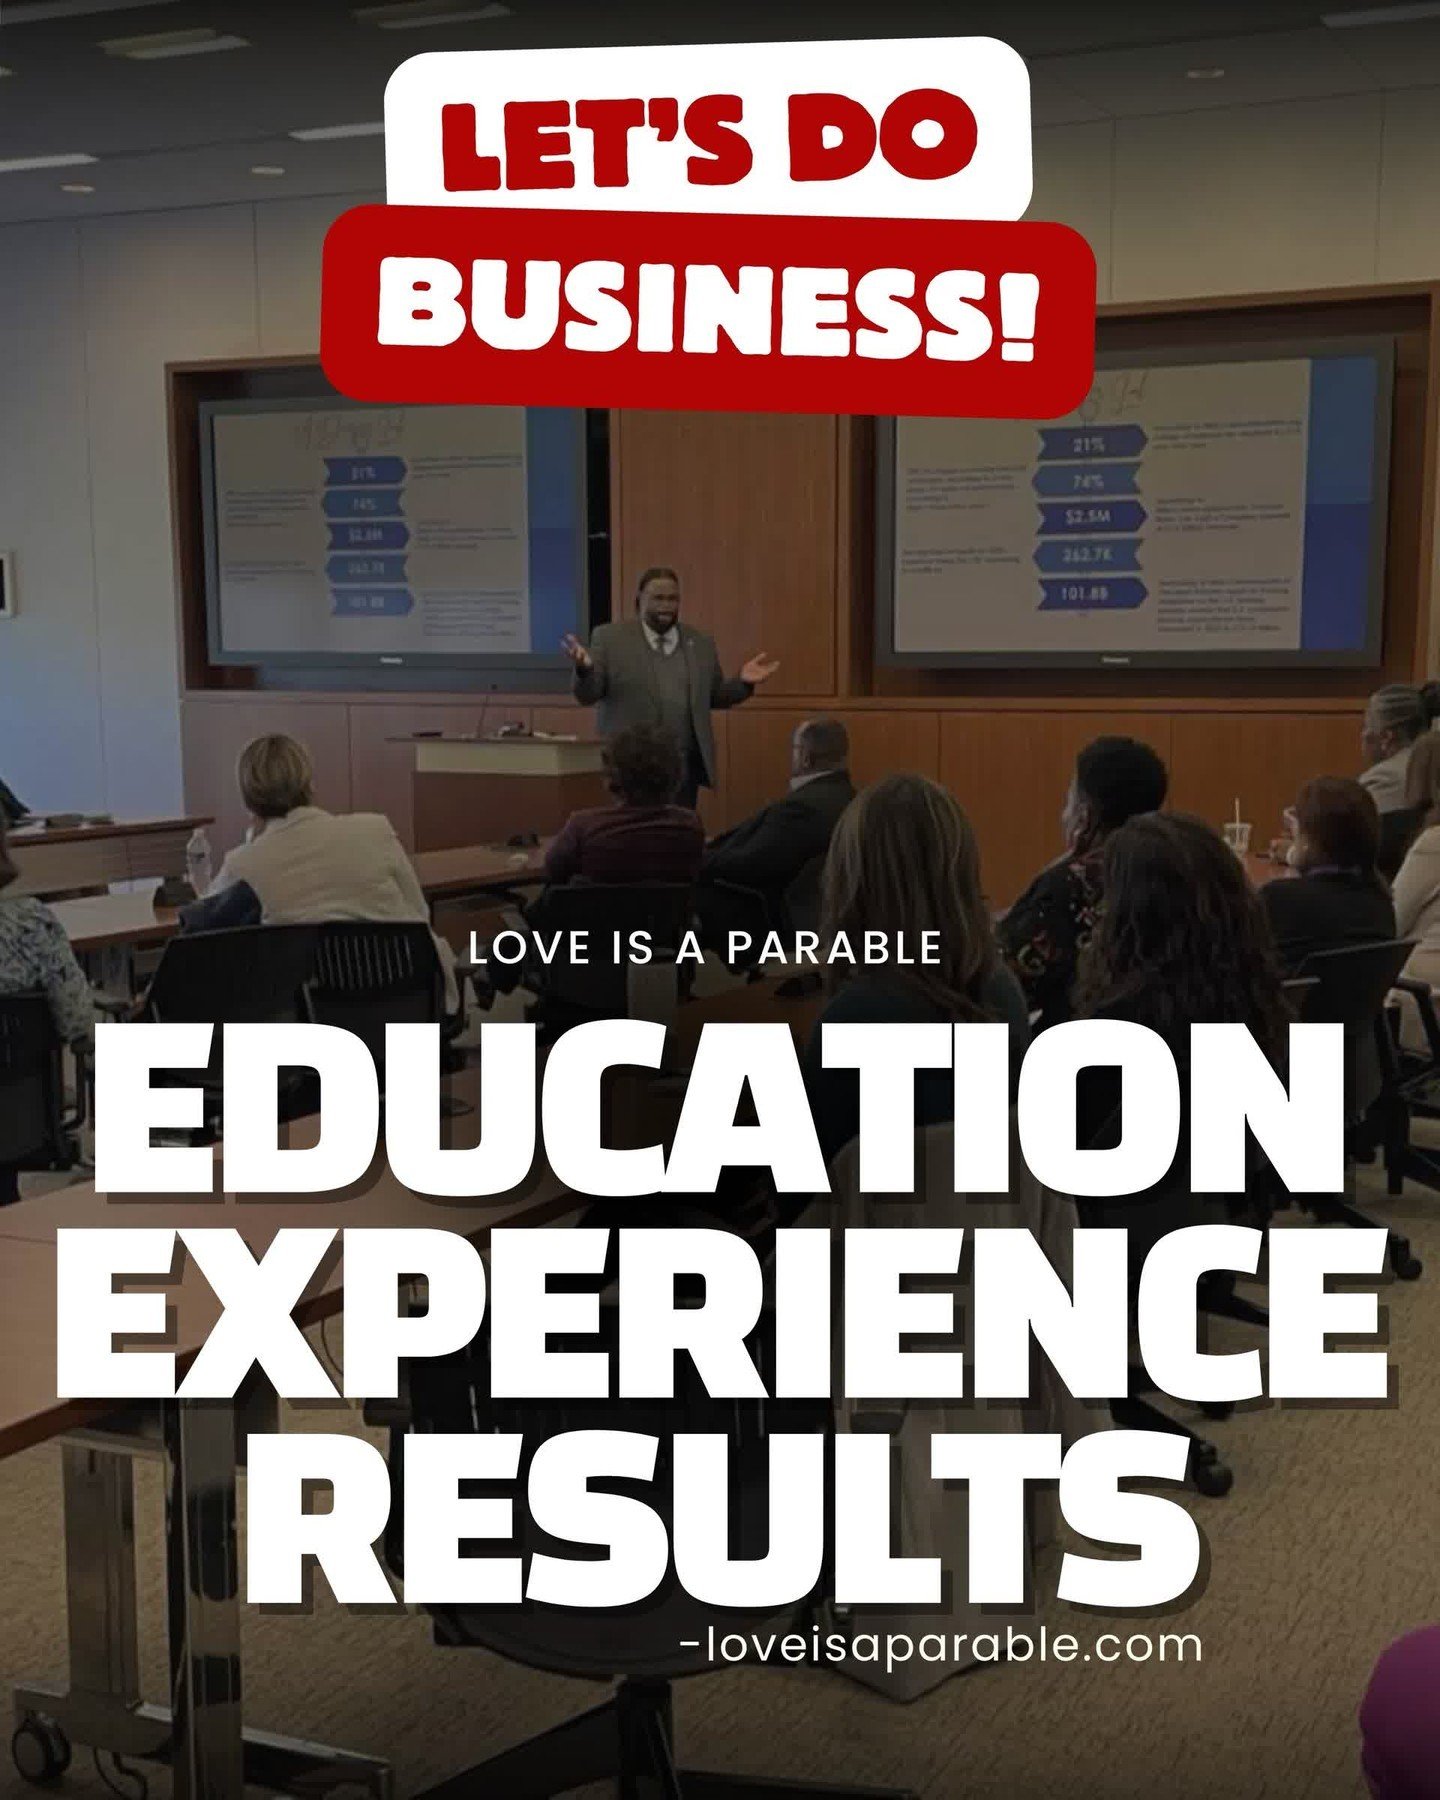 Love Is A Parable invites you to join hands in creating meaningful change!
Let's do business together. We offer Education, Experience, and the results you need.
Discover more at loveisaparable.com.

#LoveIsAParable #BusinessOpportunity #Education #Ex